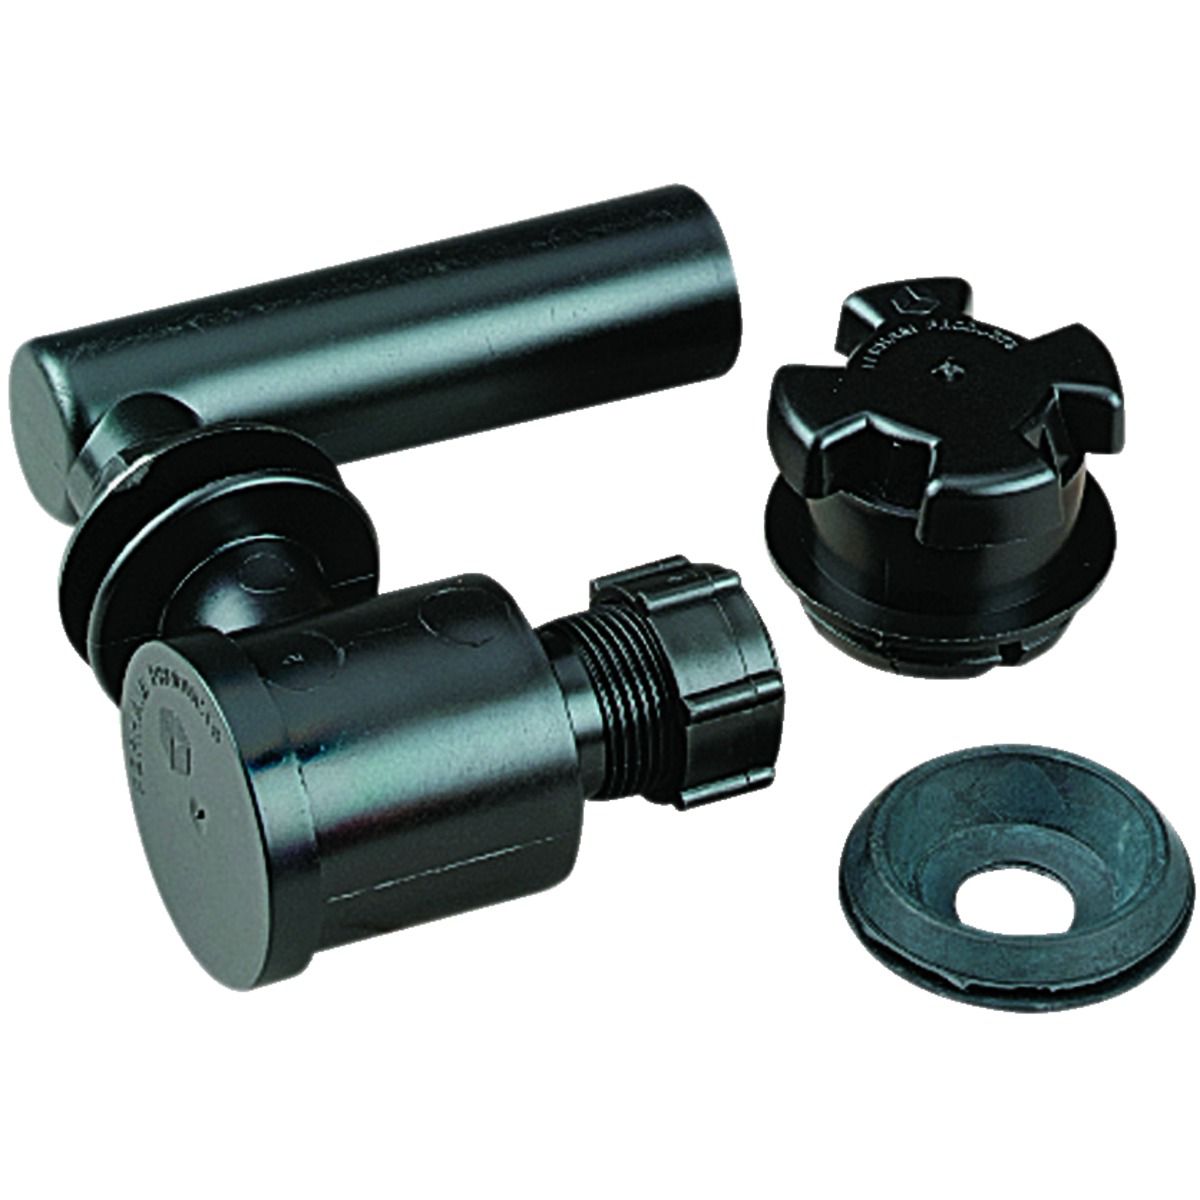 Image of Wickes Black Byelaw 30 Cold Water Tank Fitting Kit